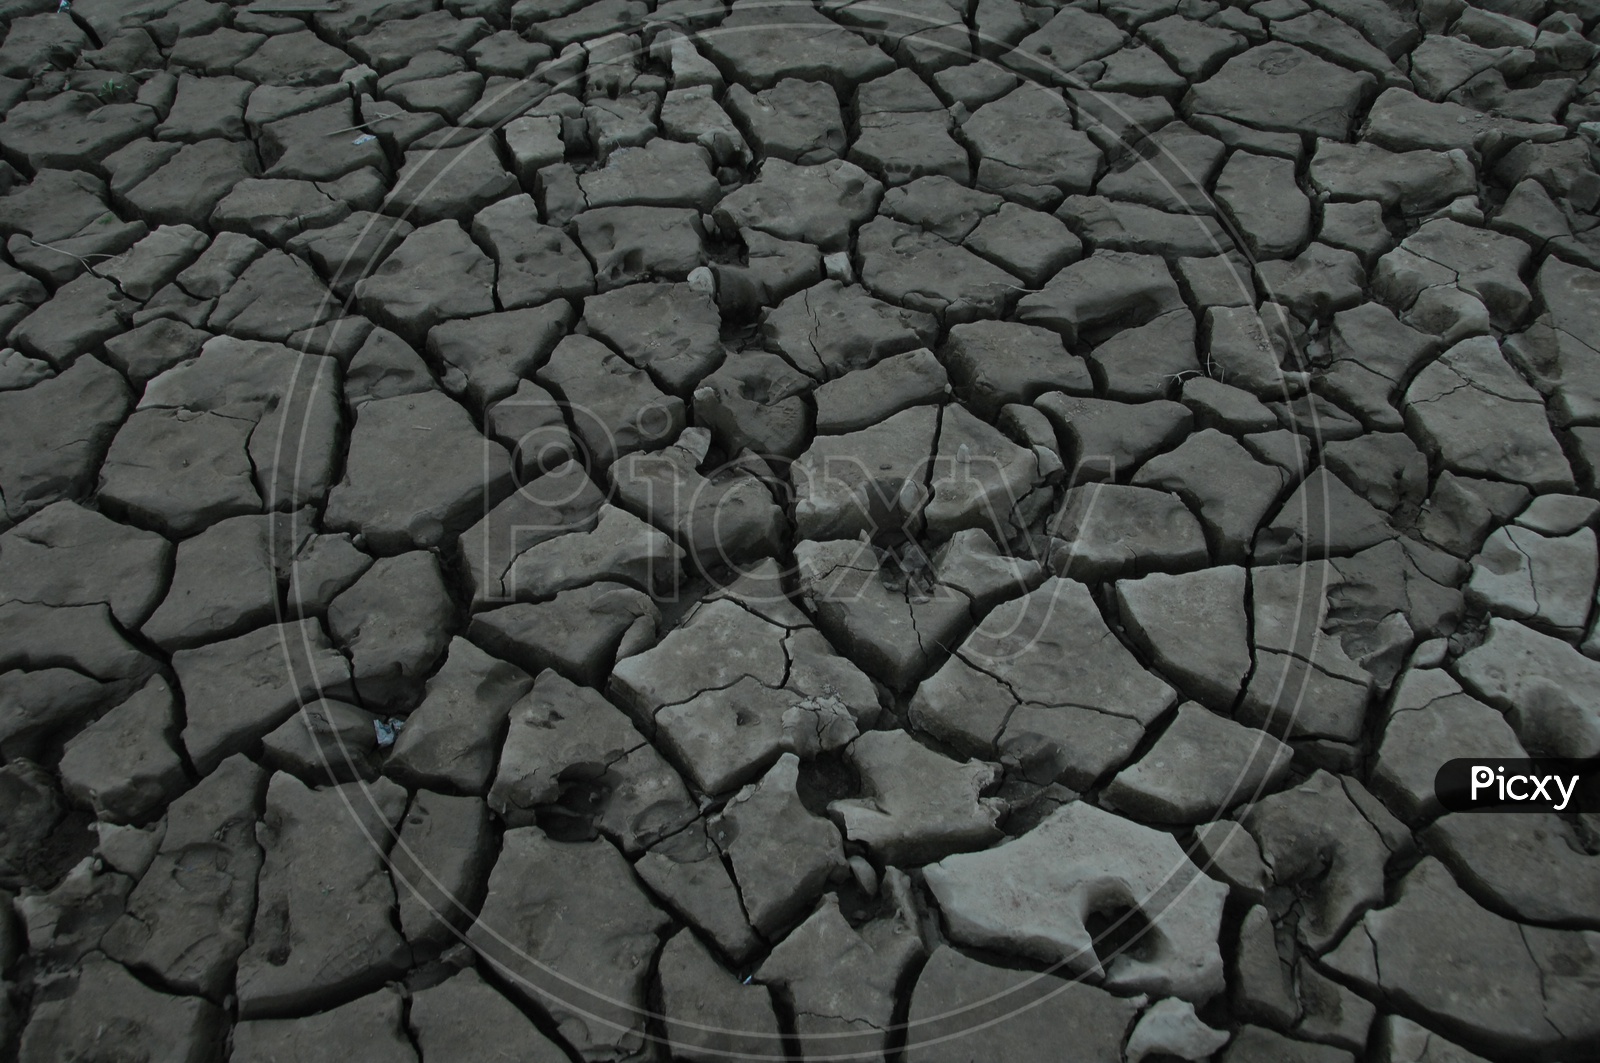 Mud Texture in a Fields, Drought,